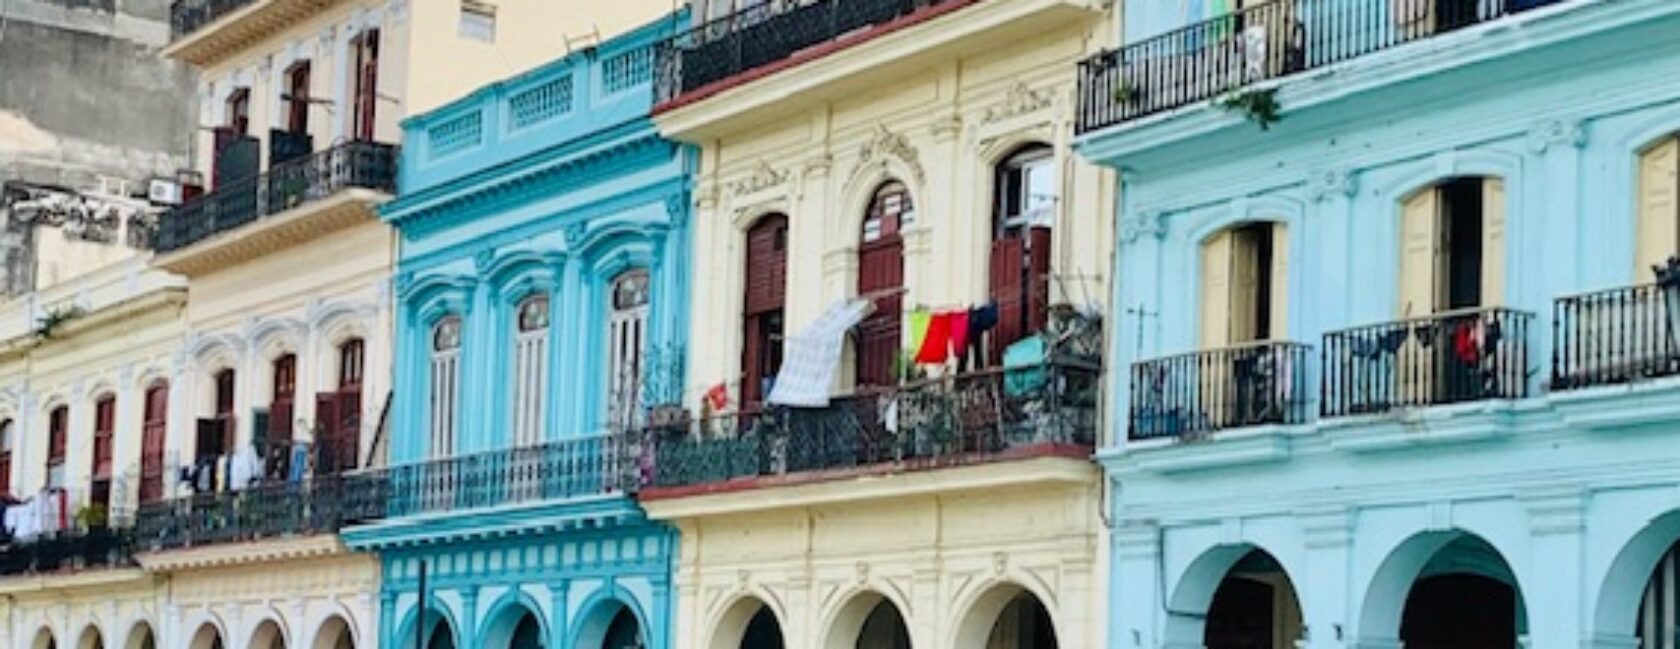 Essential information and Facts to know about Cuba